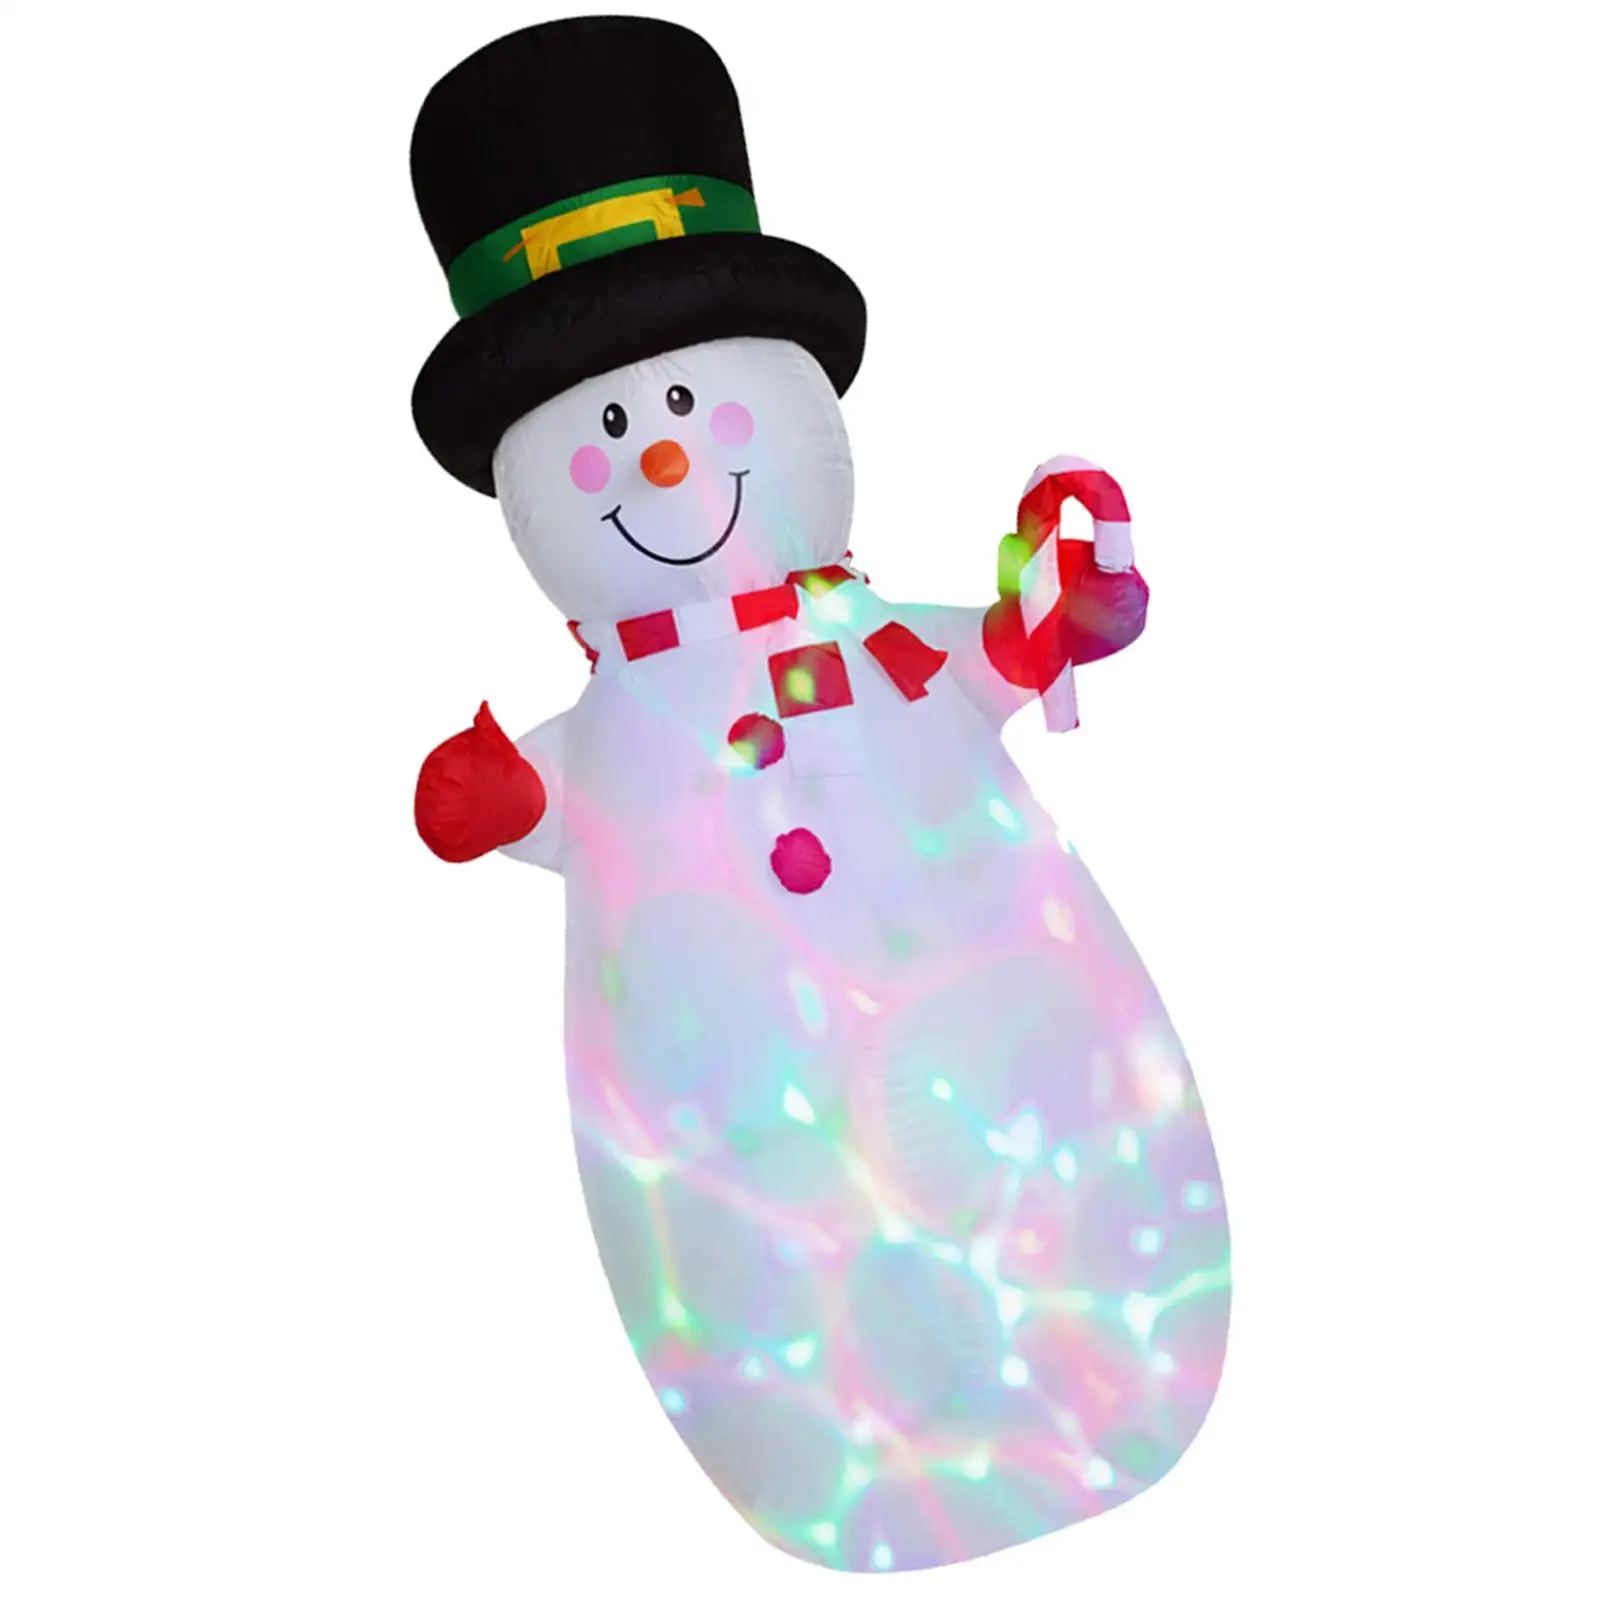 6 ft Christmas Inflatable Snowman with Rotating Light for Garden Yard